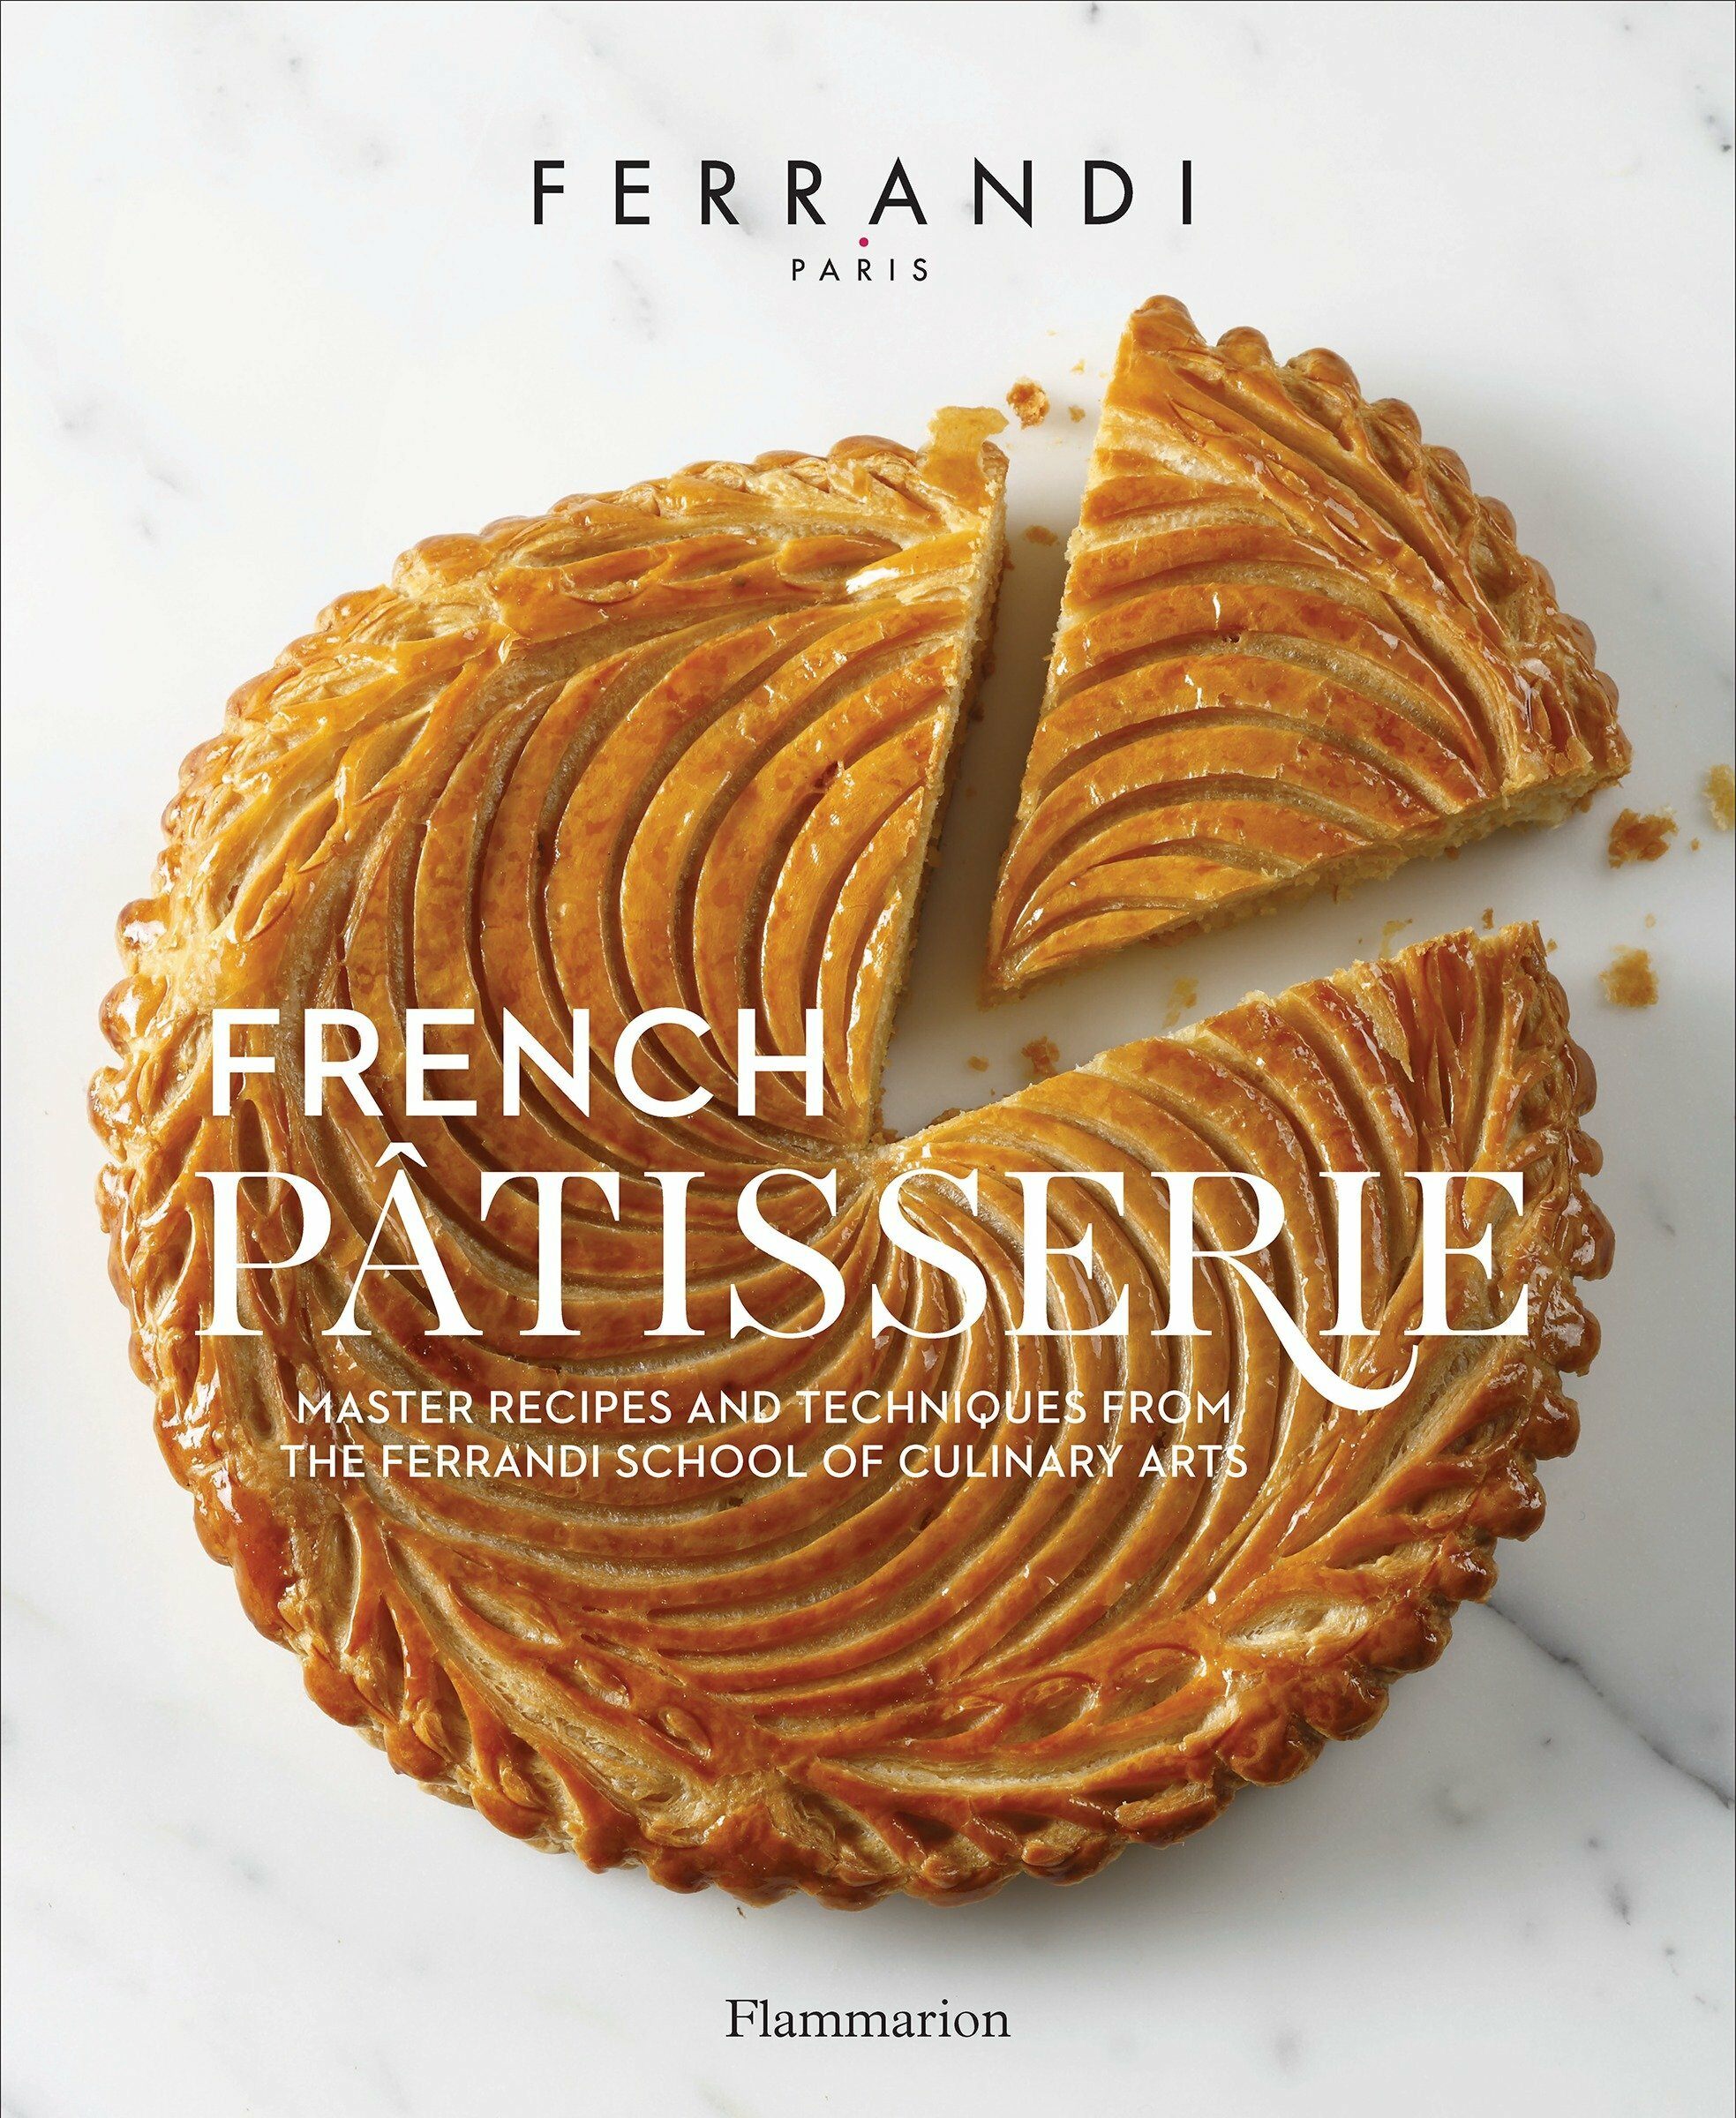 French Patisserie: Master Recipes and Techniques from the Ferrandi School of Culinary Arts (Hardcover)